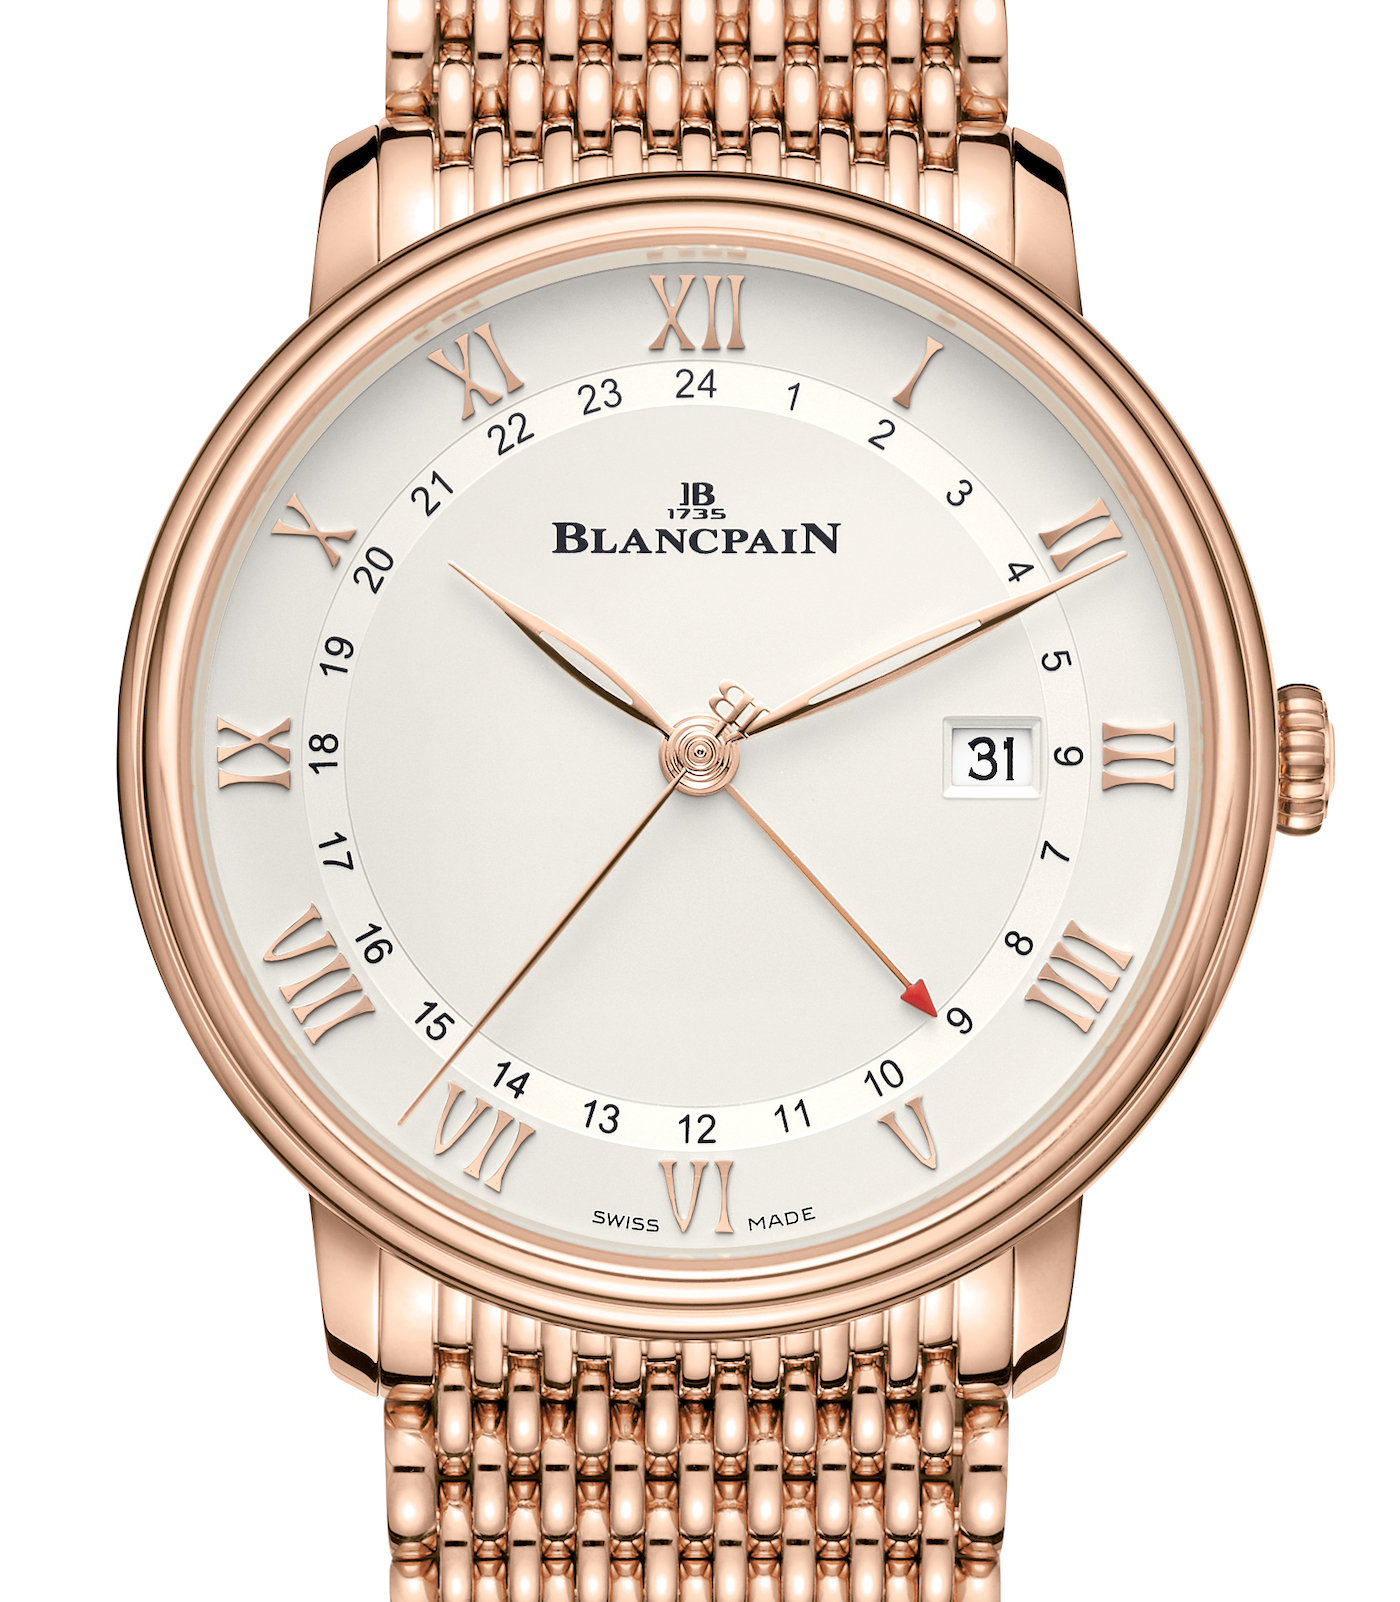 Blancpain Villeret GMT Date Watch Offers Multiple Functions In A Pared-Back Package Watch Releases 